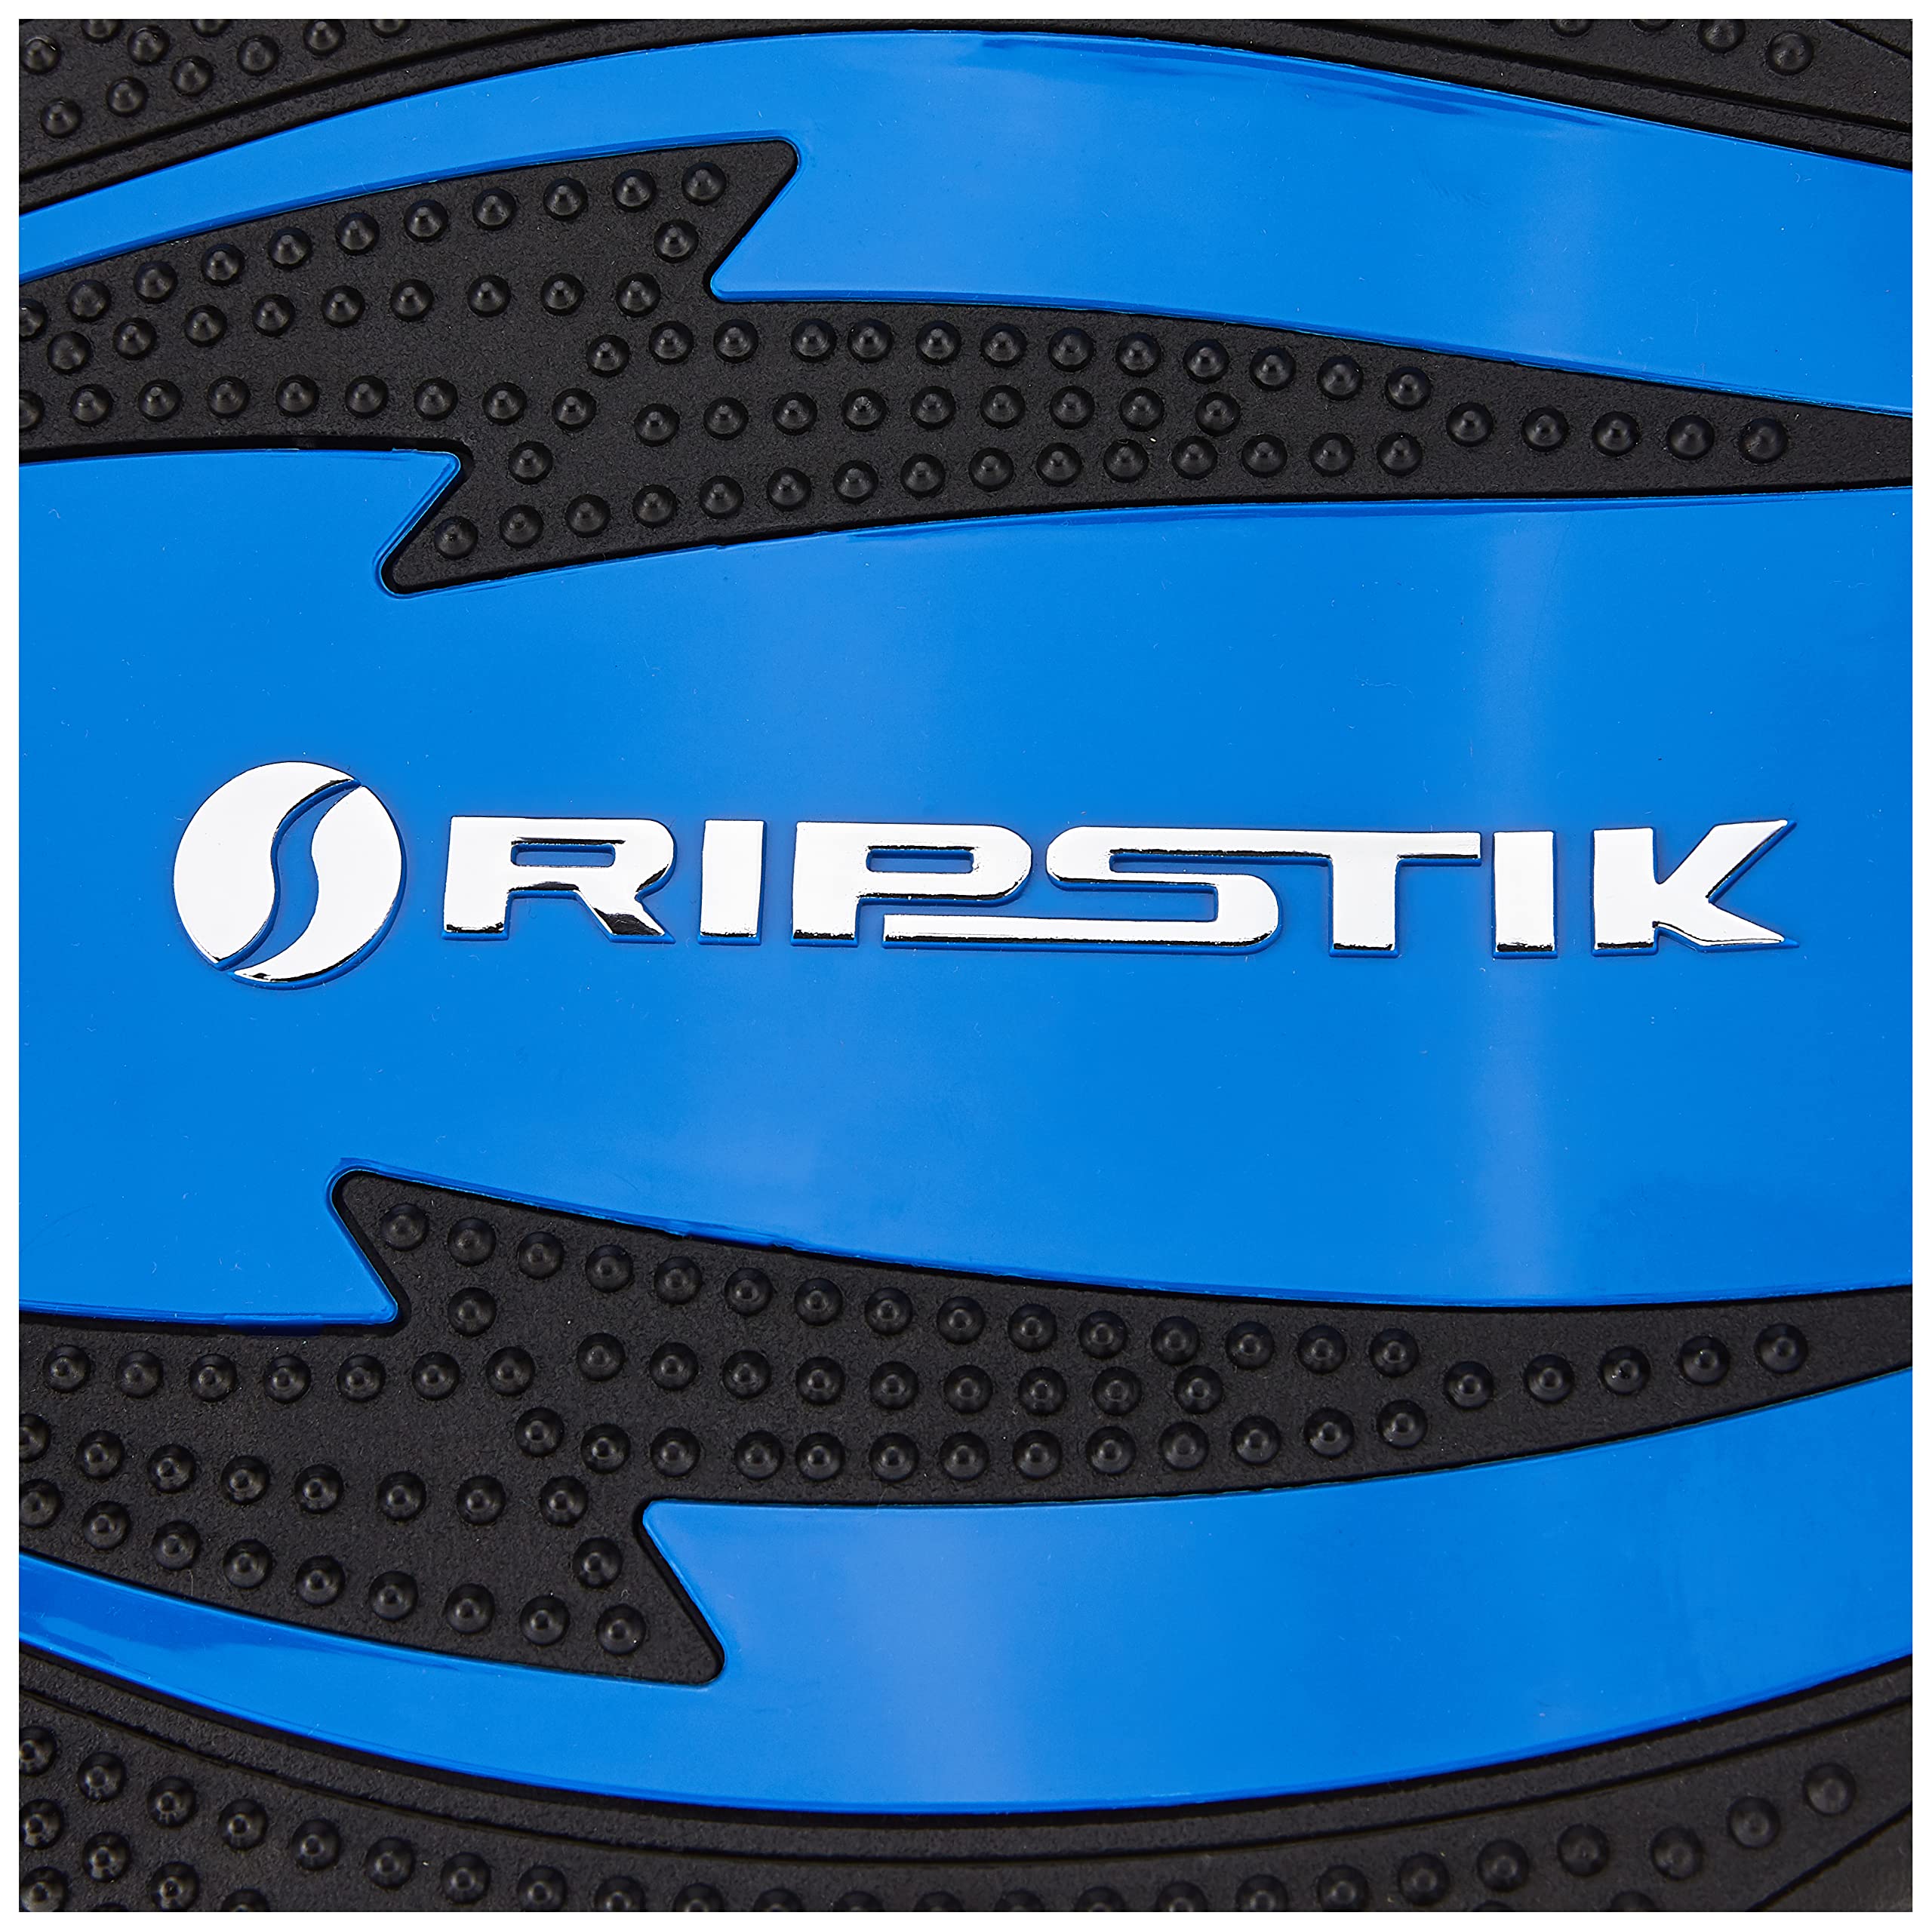 Razor RipStik Ripster, compact lightweight caster board, for kids 8+